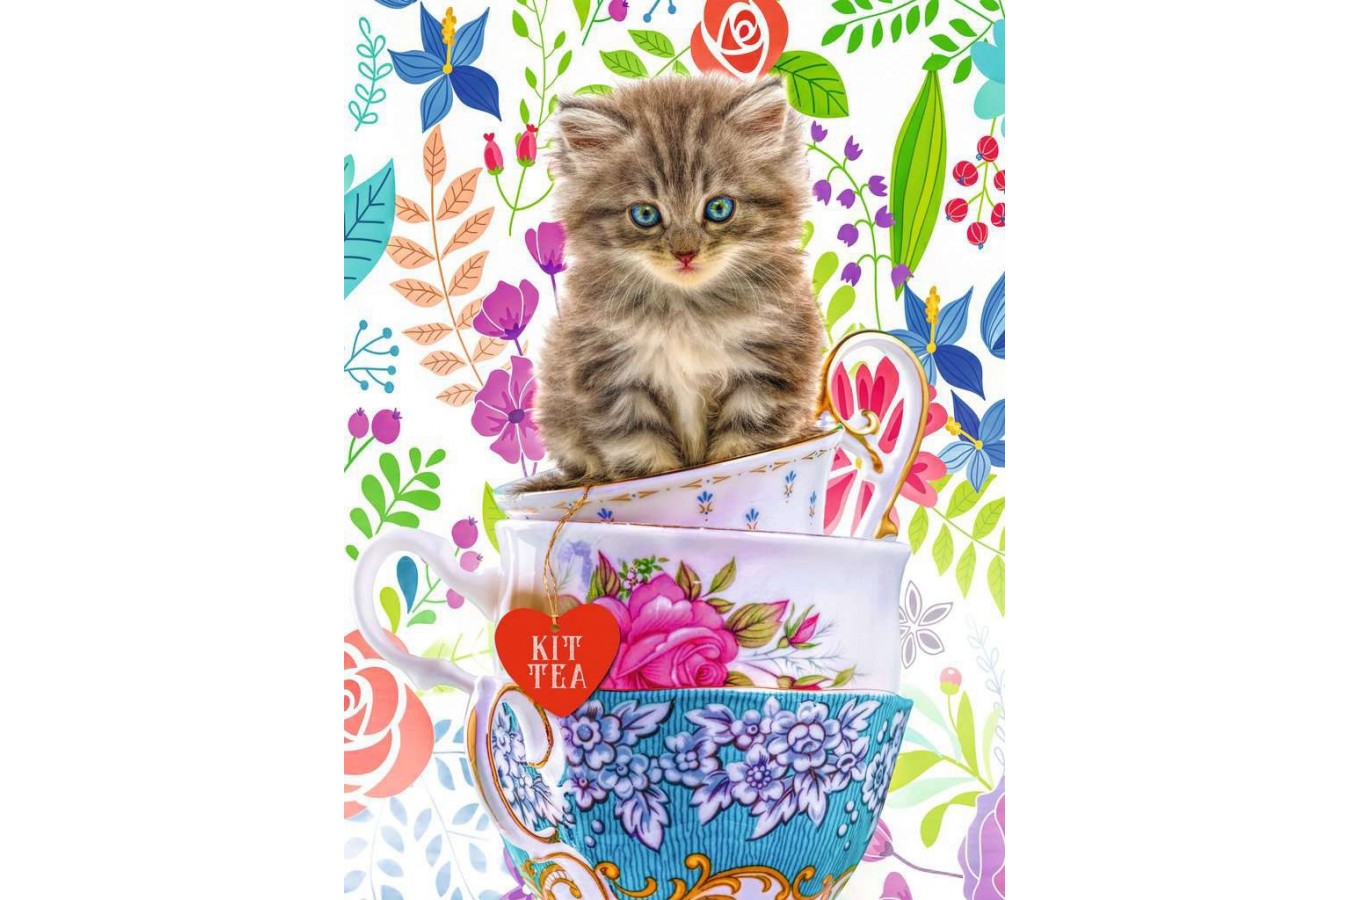 Puzzle Ravensburger - Kitten in a Cup, 500 piese (15037)